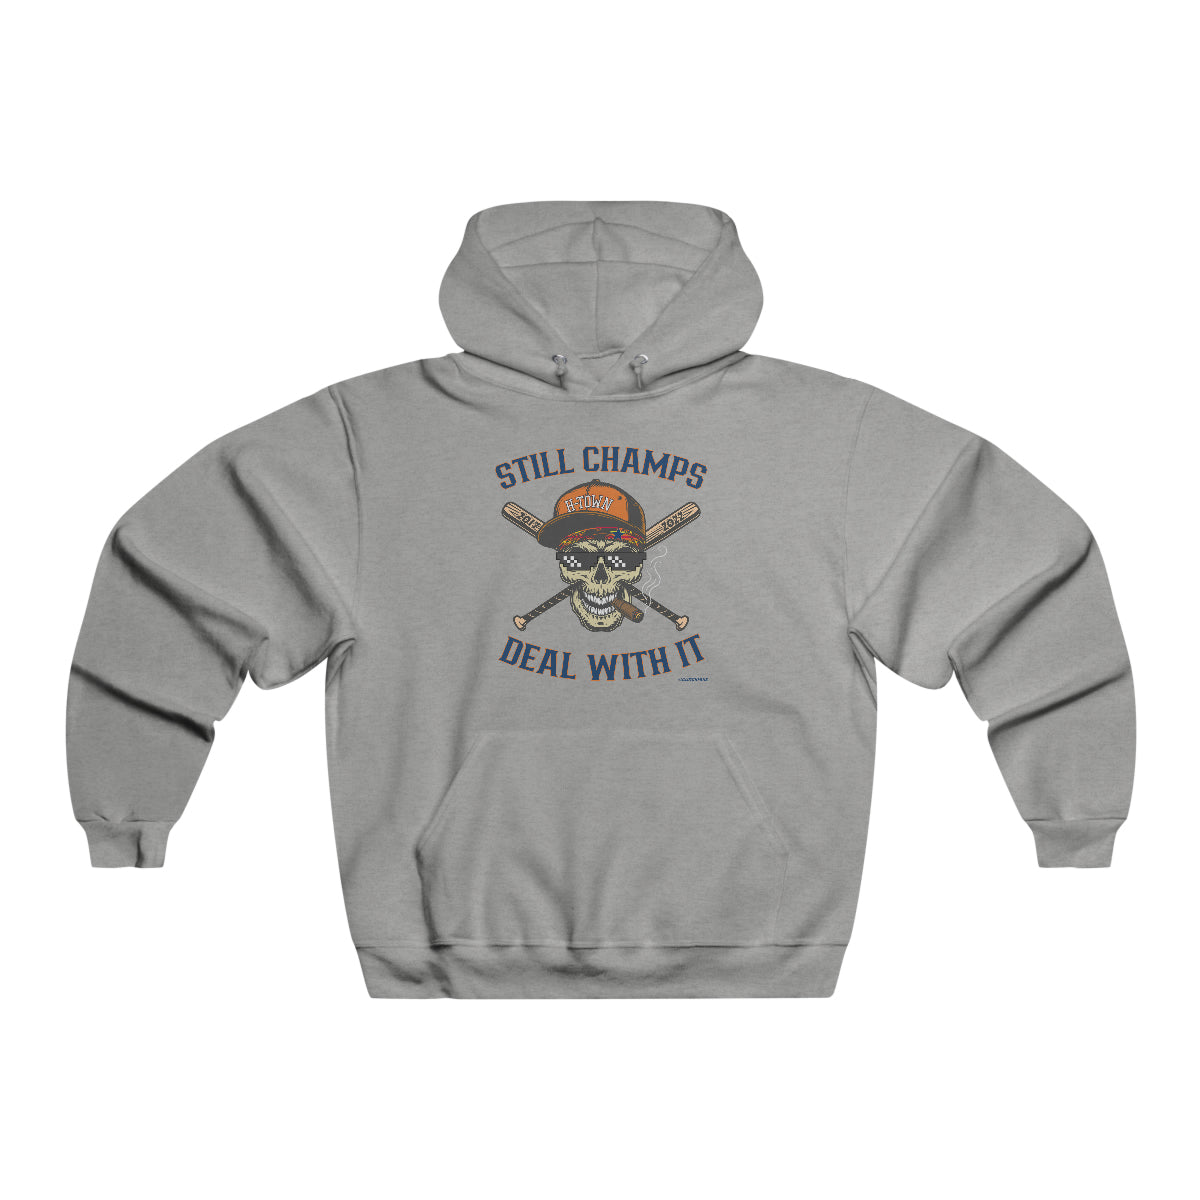 STILL CHAMPS: Deal With It! - Hooded Sweatshirt